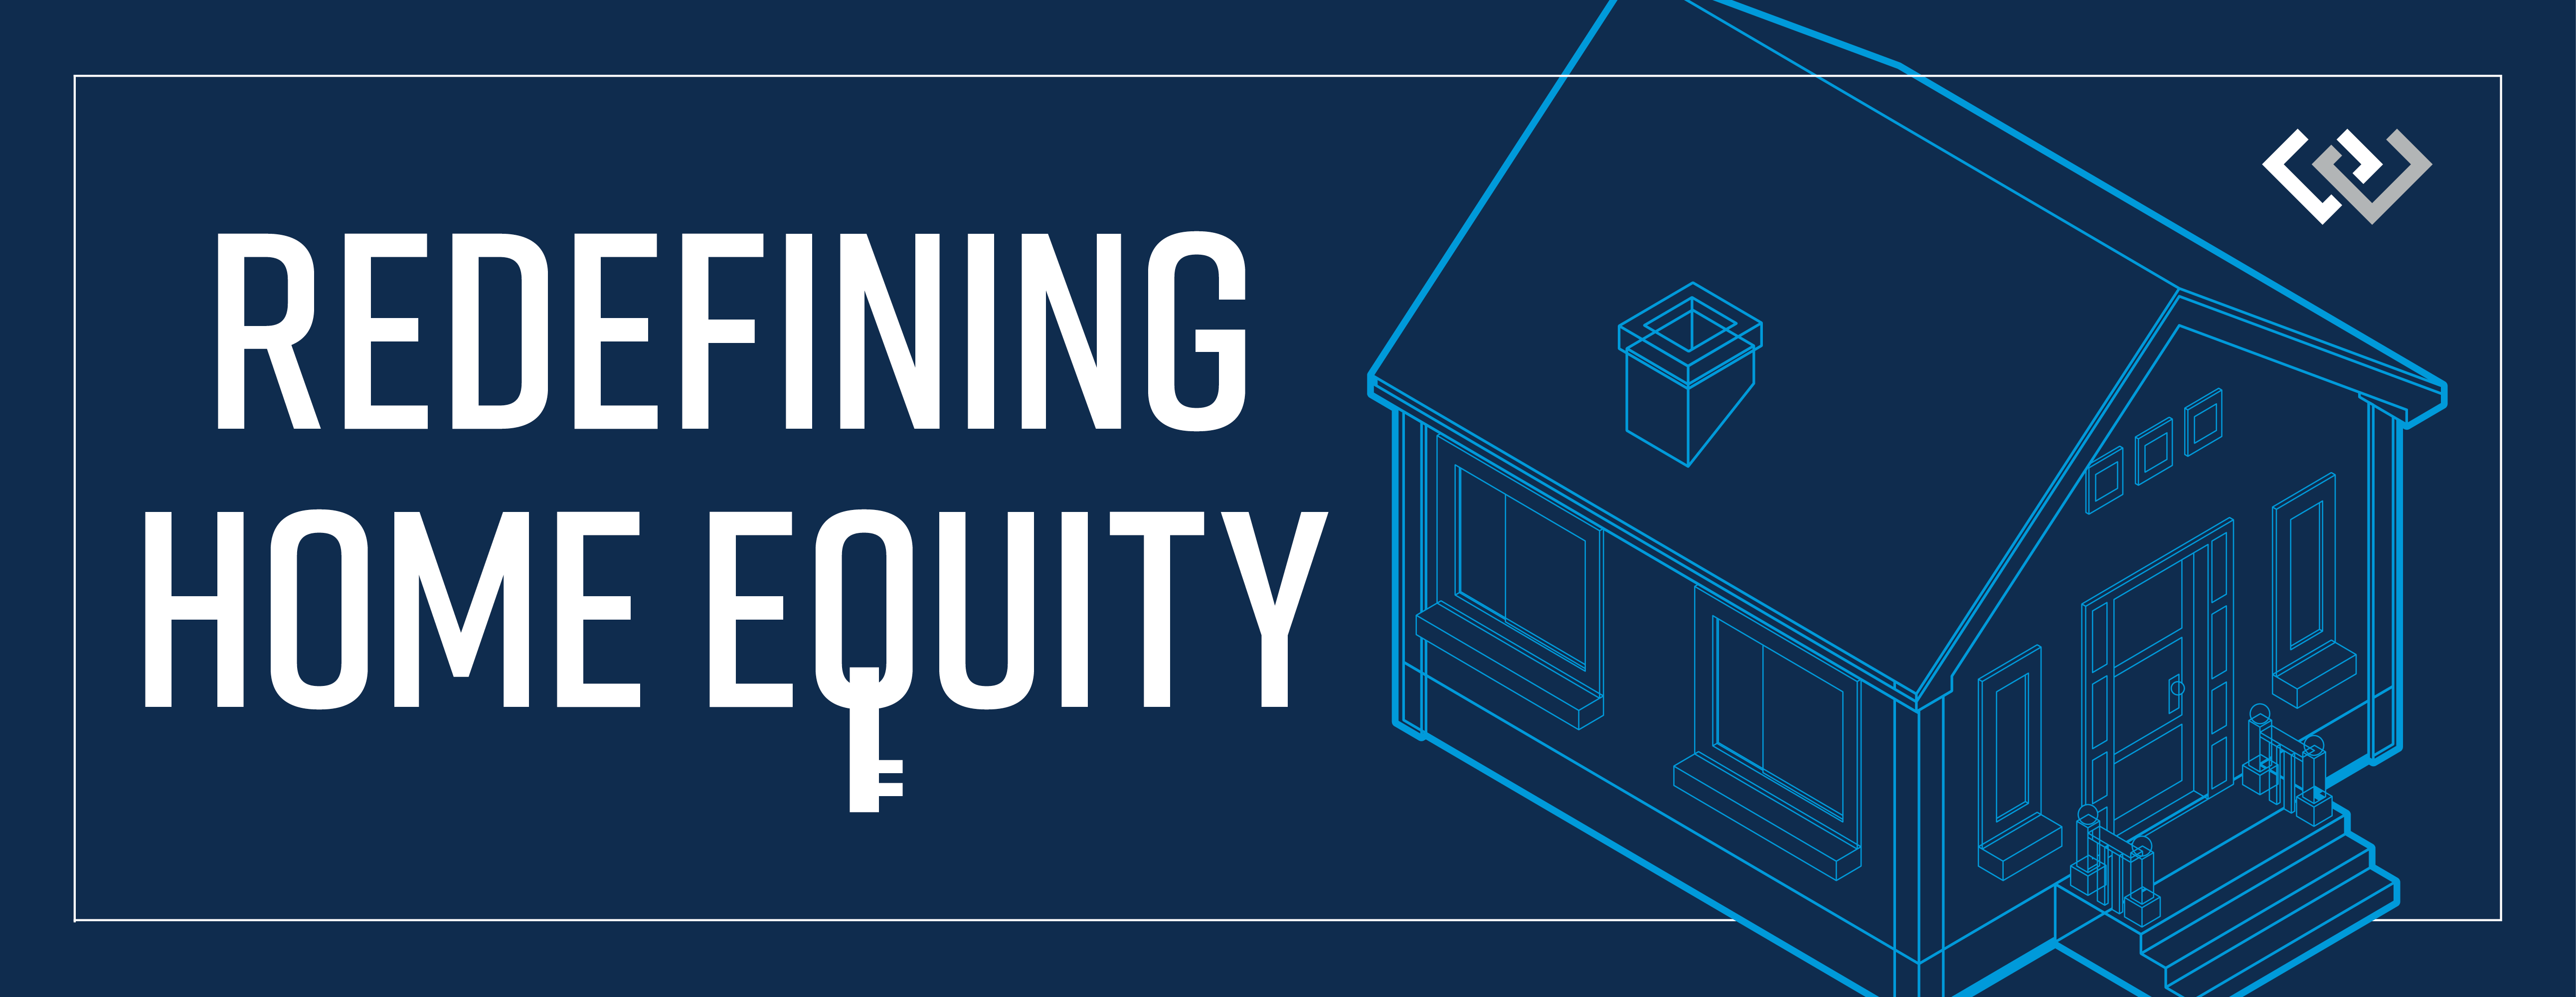 A graphic: blueprint style house with the words “redefining home equity” above it.